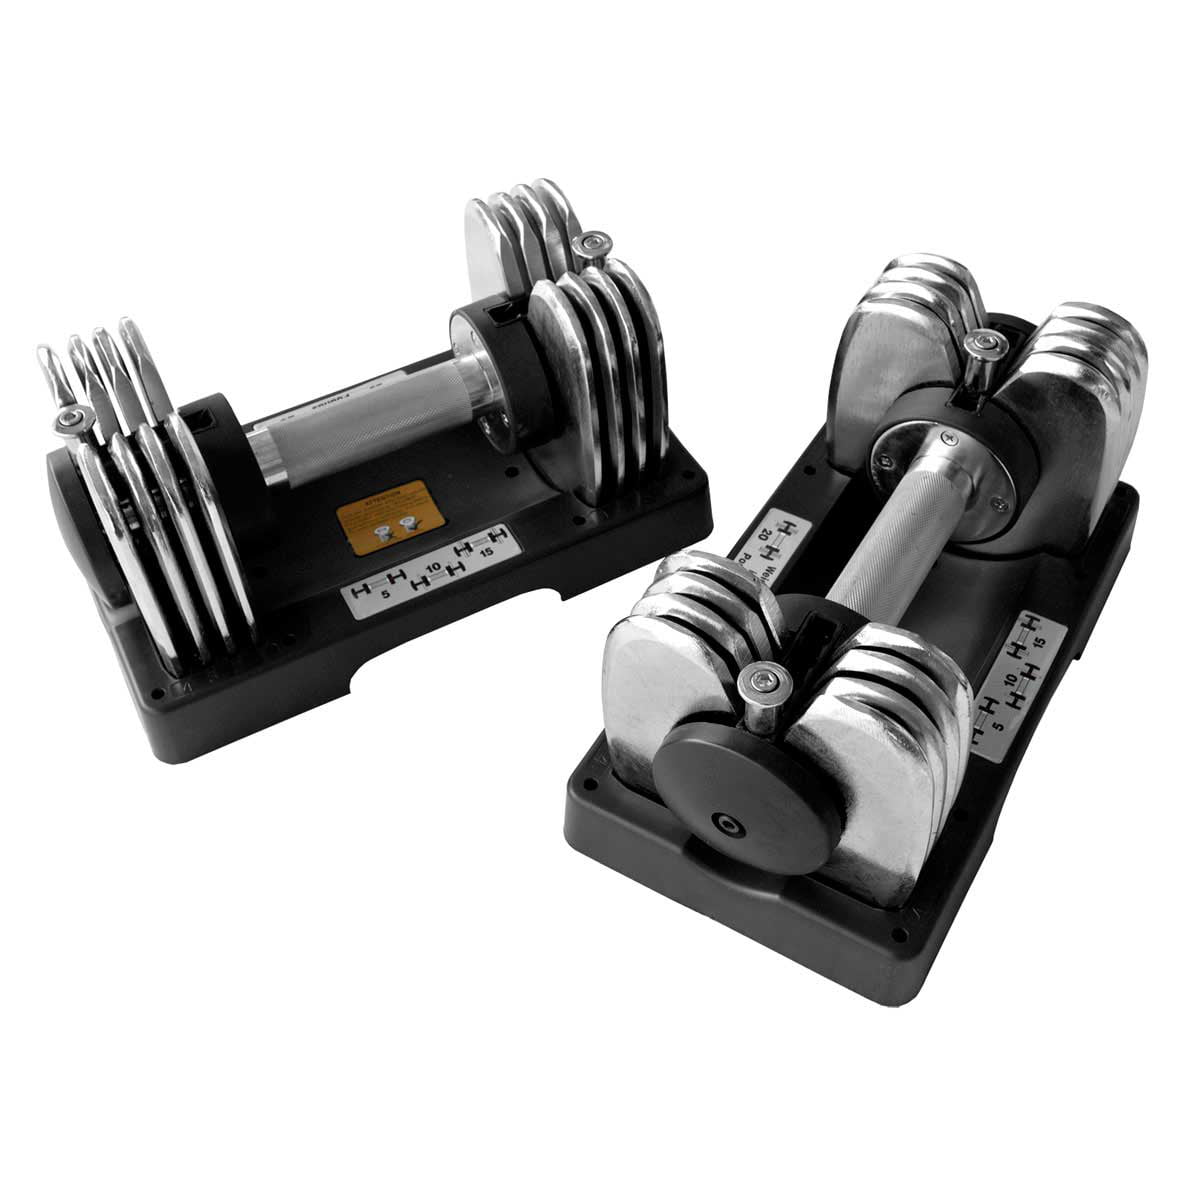 SHIPS FREE TODAY Proform Fusion Space Saver 25lb Adjustable Dumbbells w/ Tray